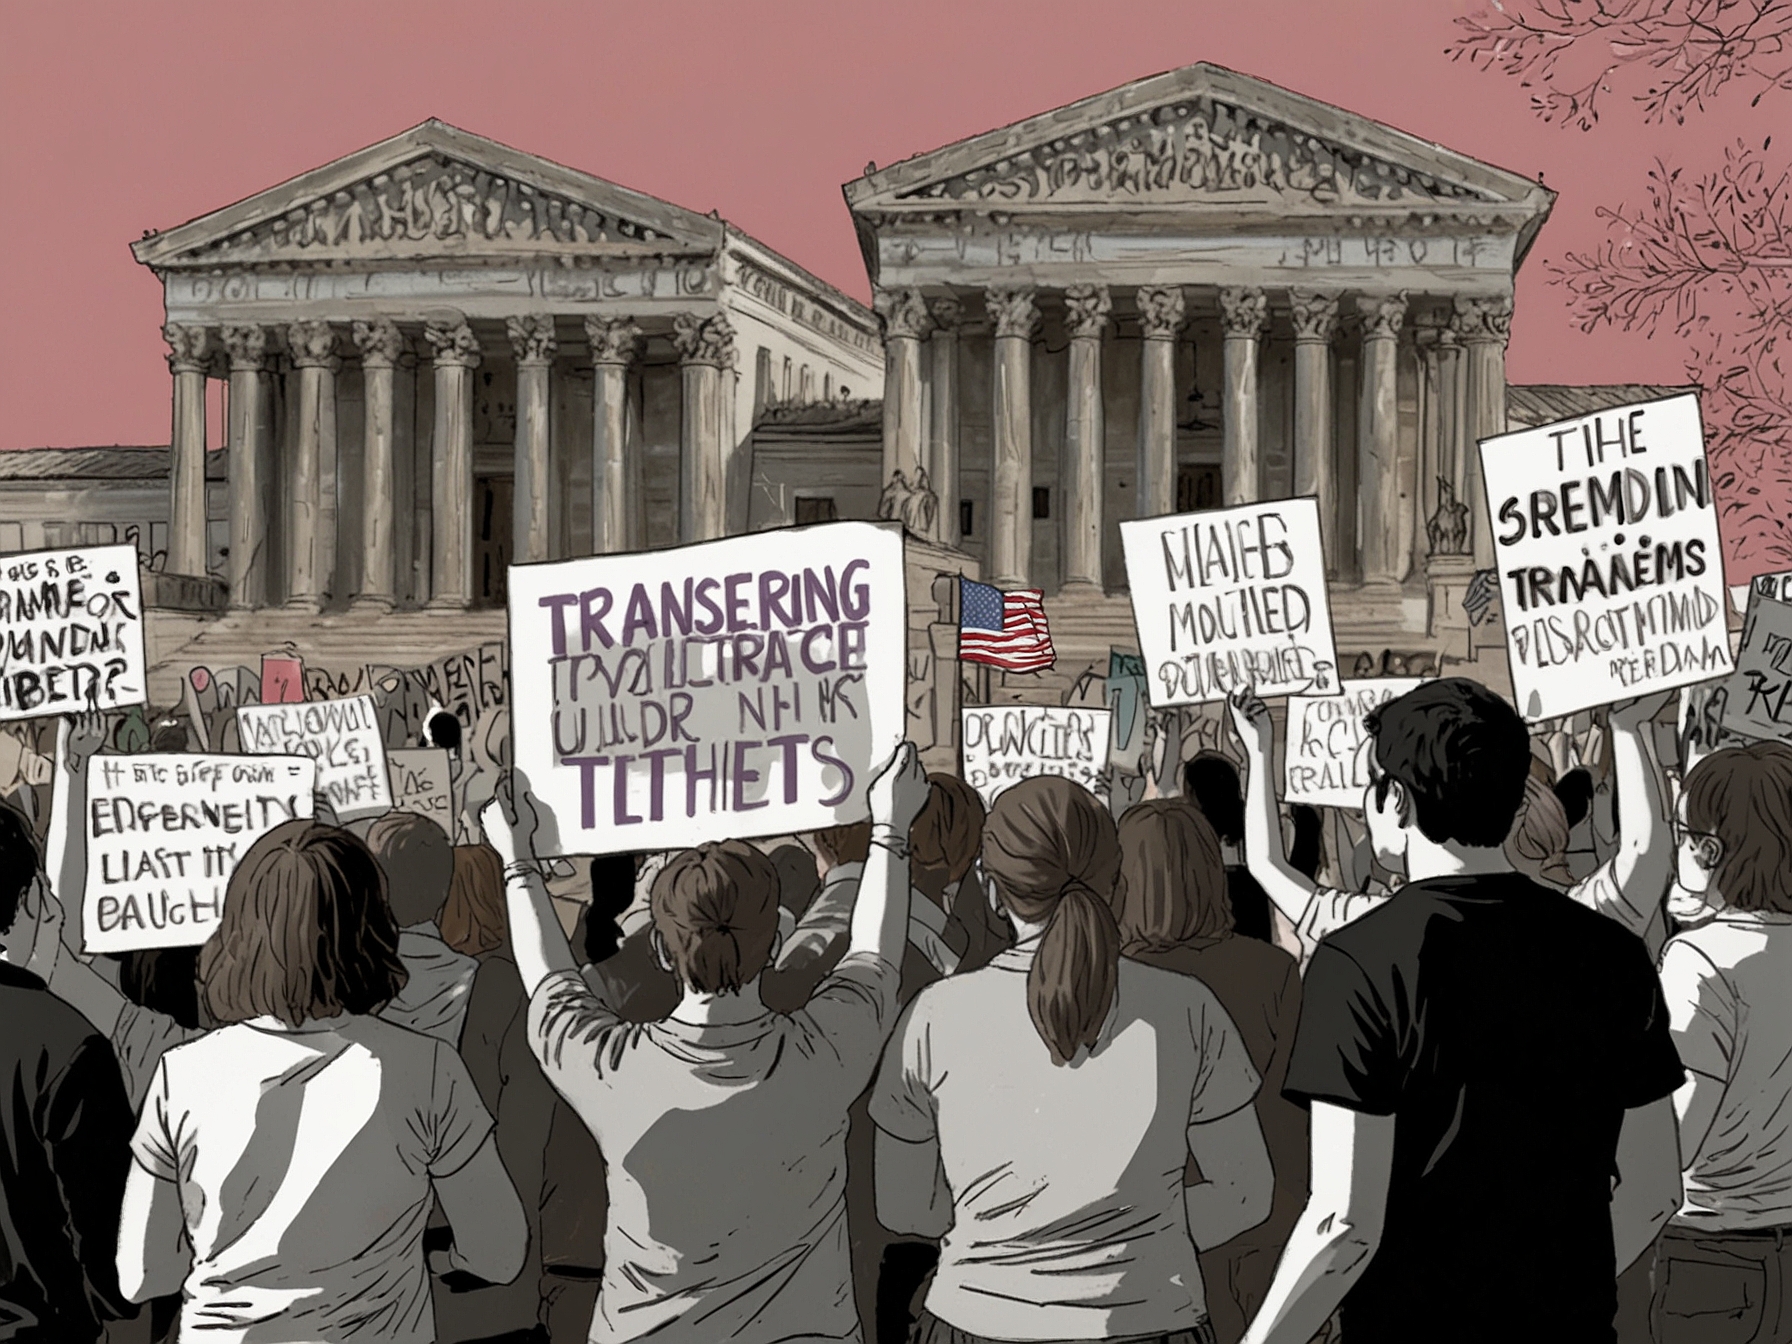 Protesters with signs advocating for transgender youth rights emphasize the contentious national debate as the Supreme Court prepares to rule on crucial healthcare access issues.